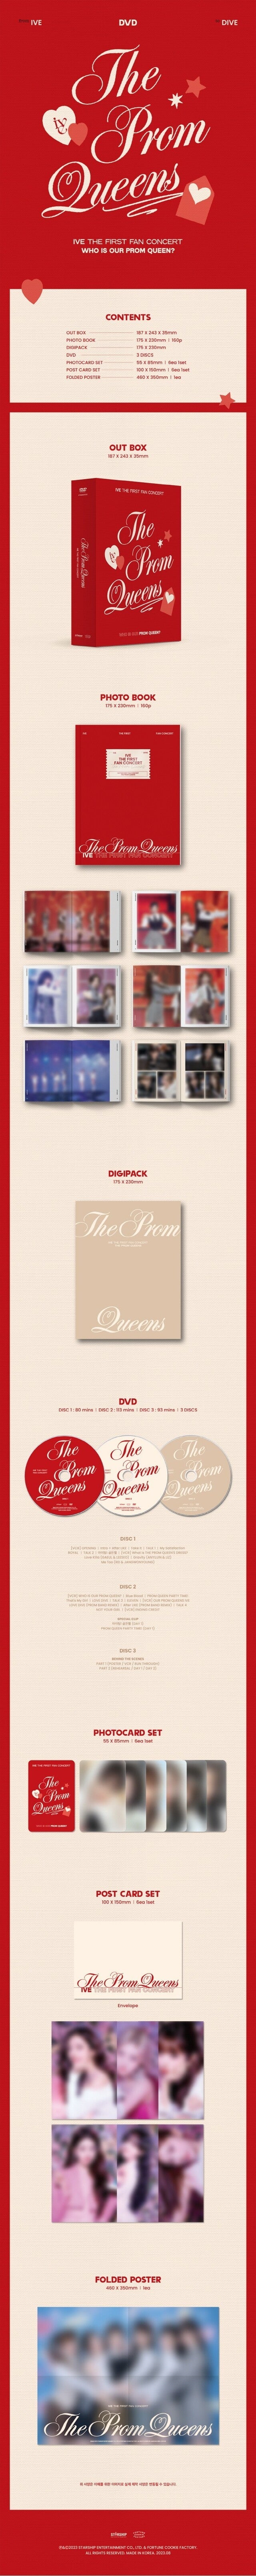 [PREORDER] STARSHIP IVE - THE FIRST FAN CONCERT [THE PROM QUEENS] DVD